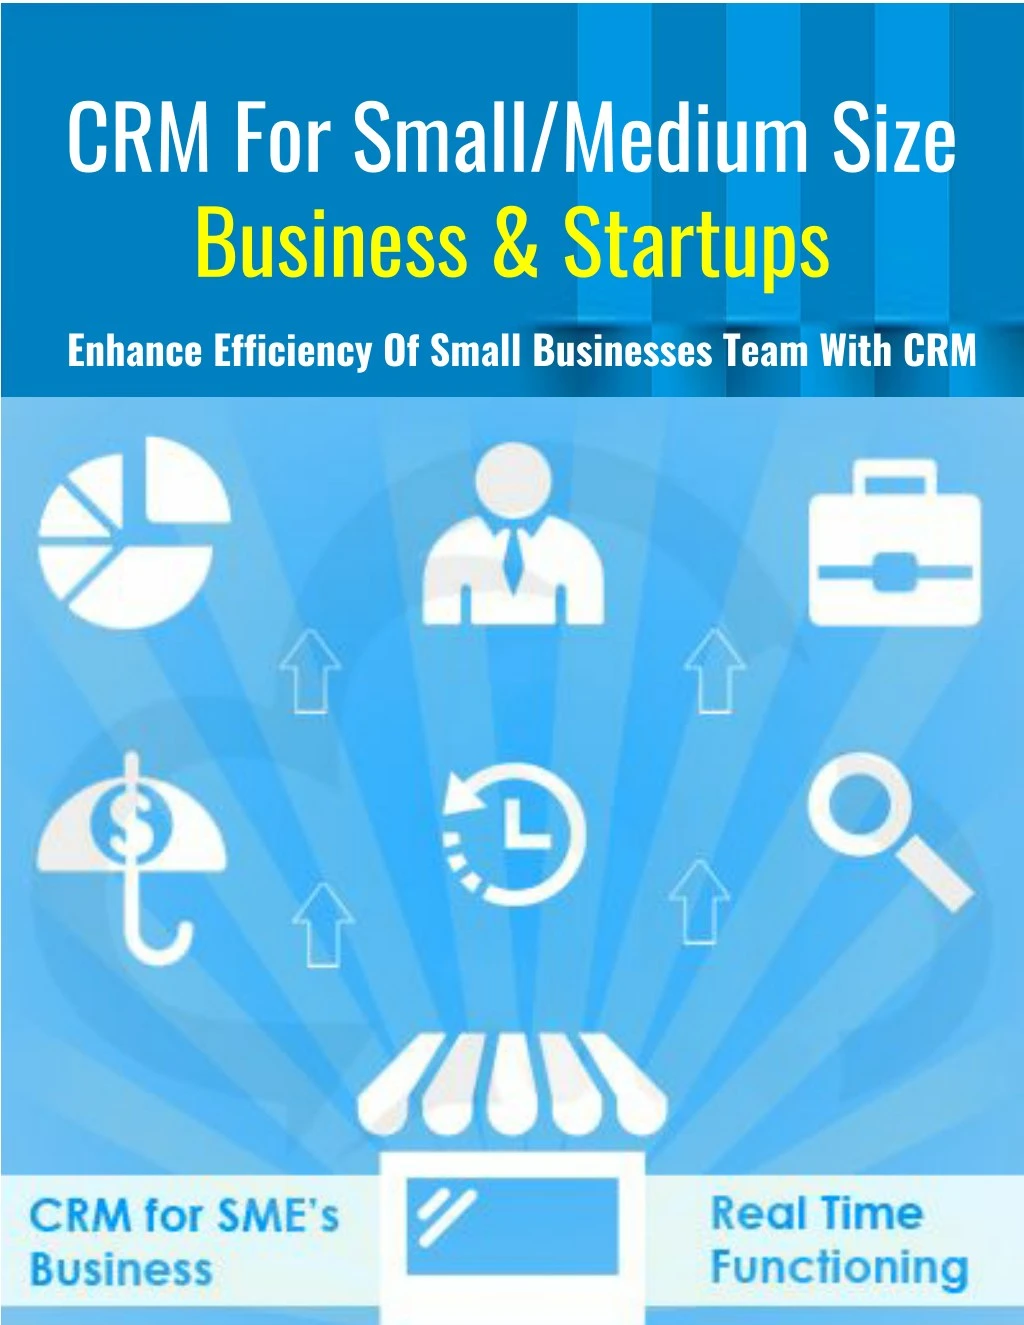 crm for small medium size business startups